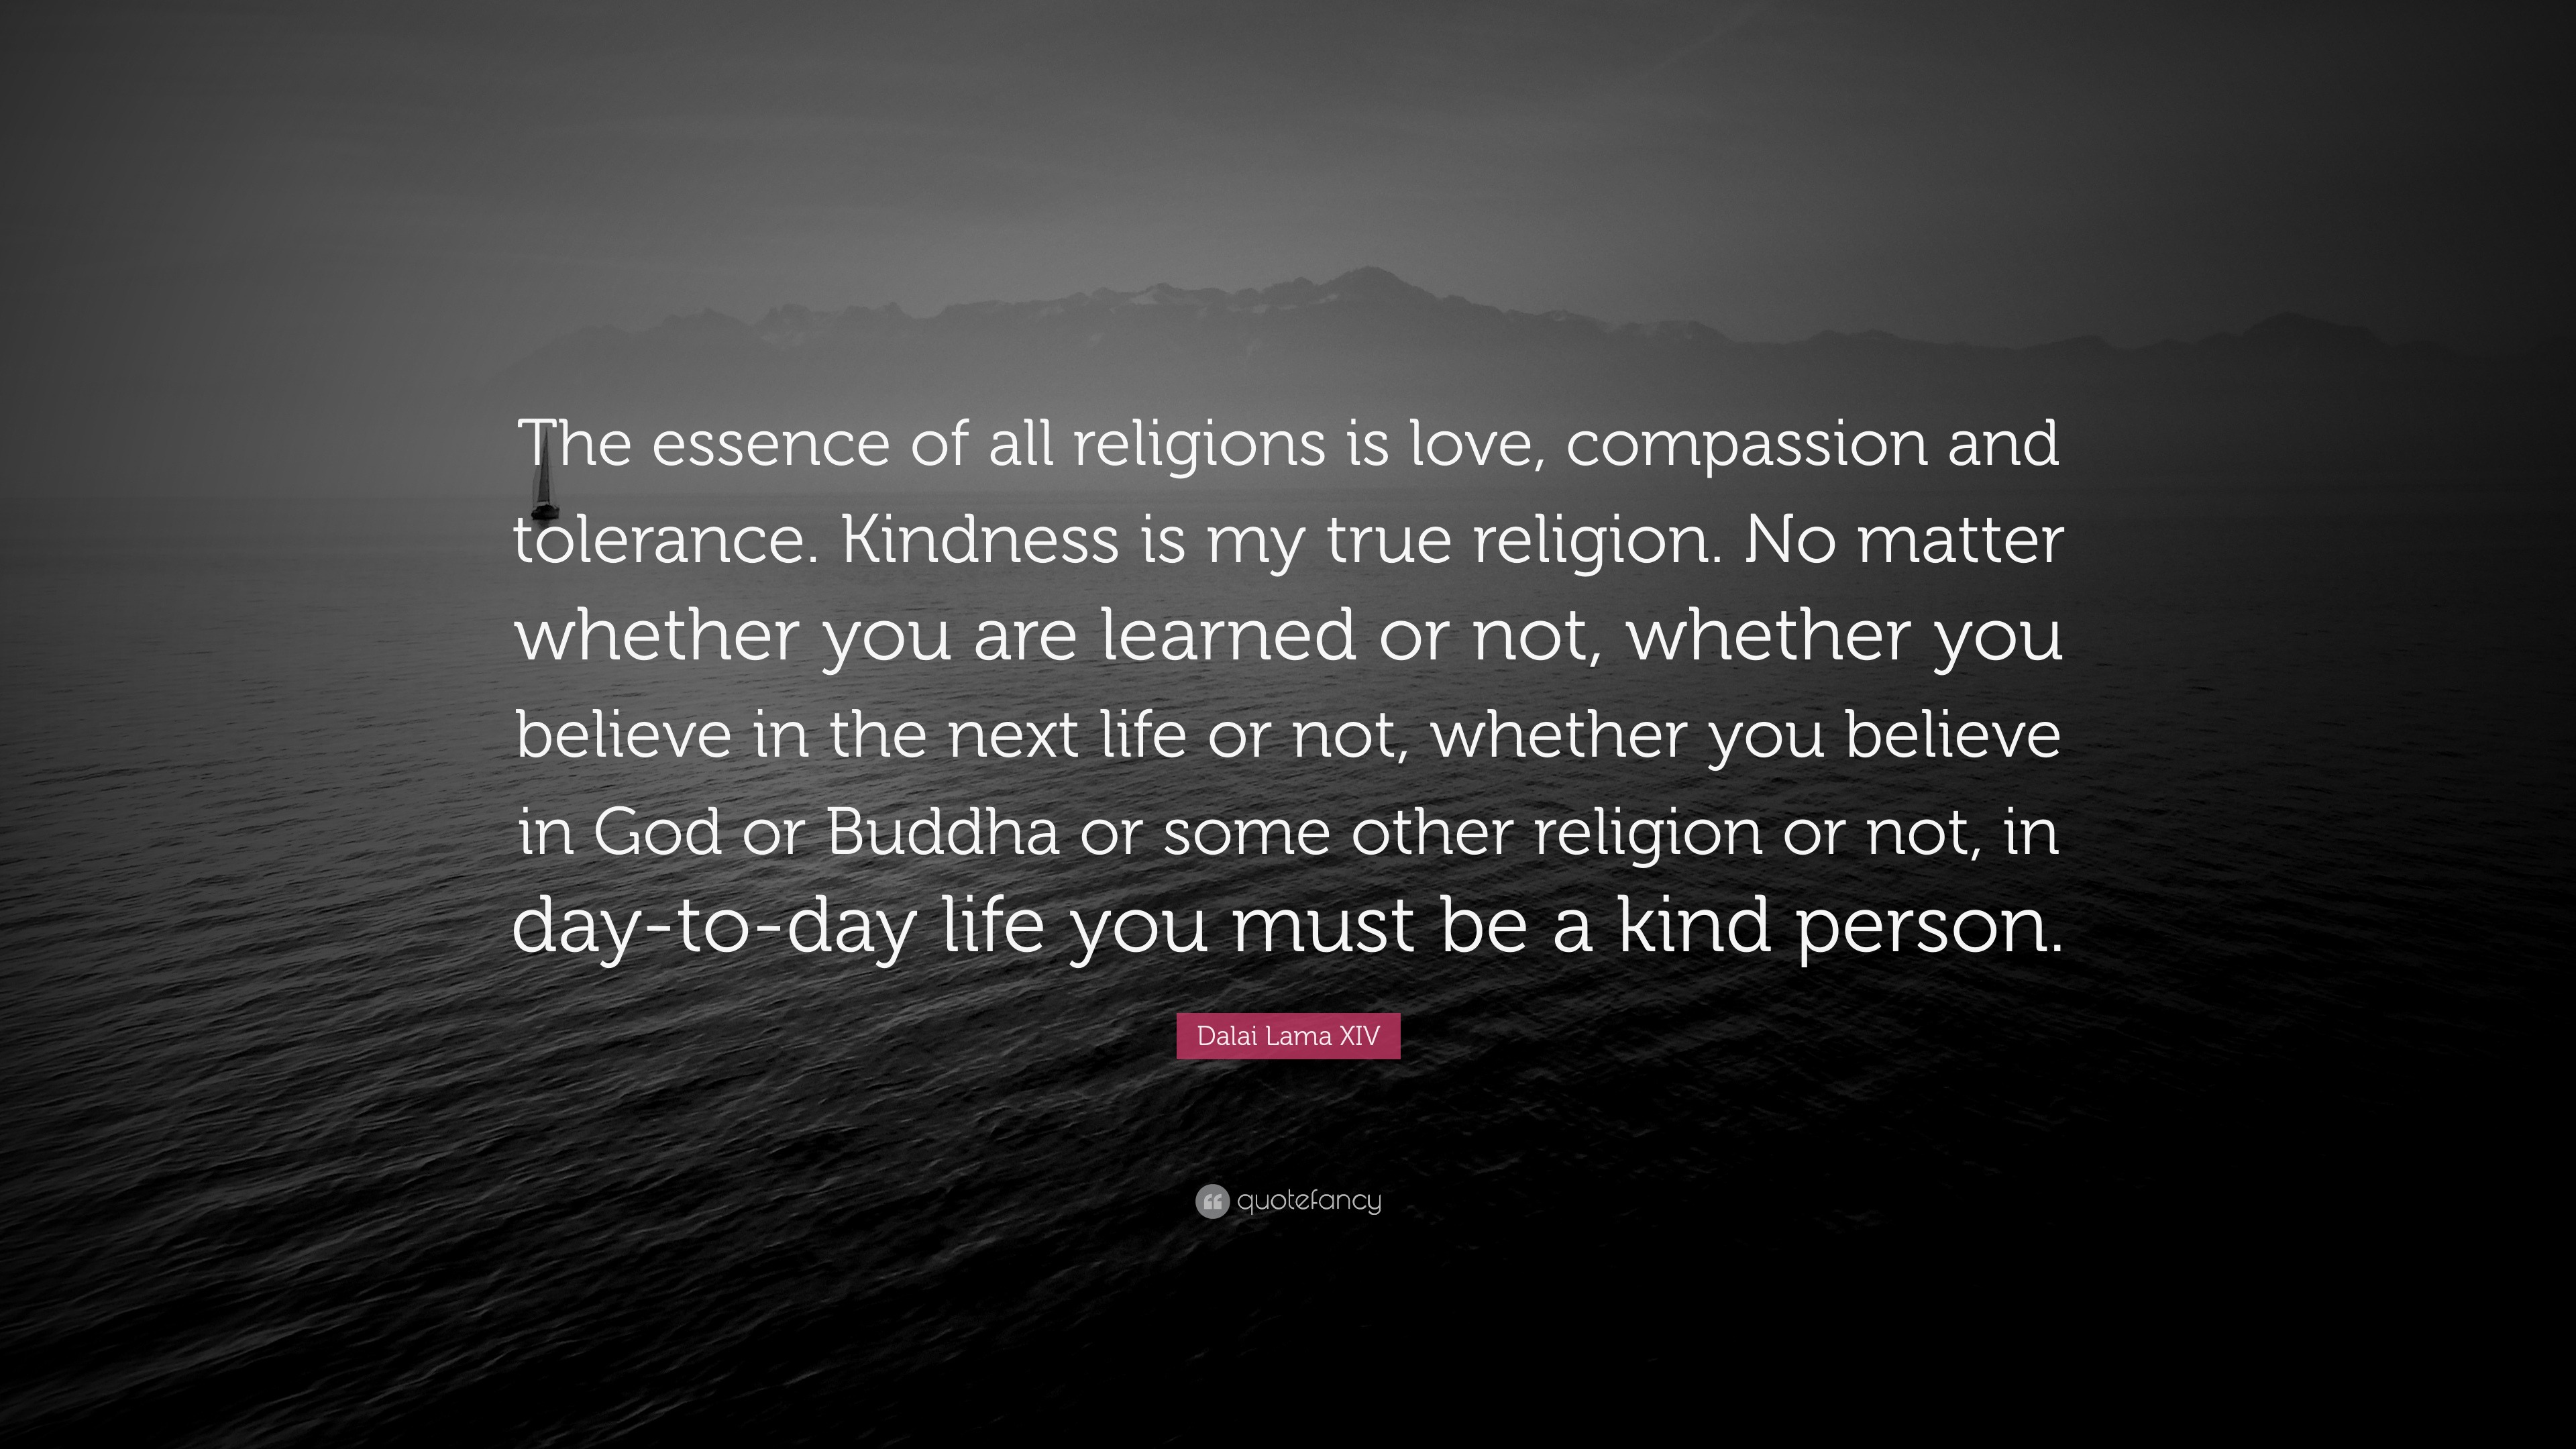 Dalai Lama XIV Quote “The essence of all religions is love passion and